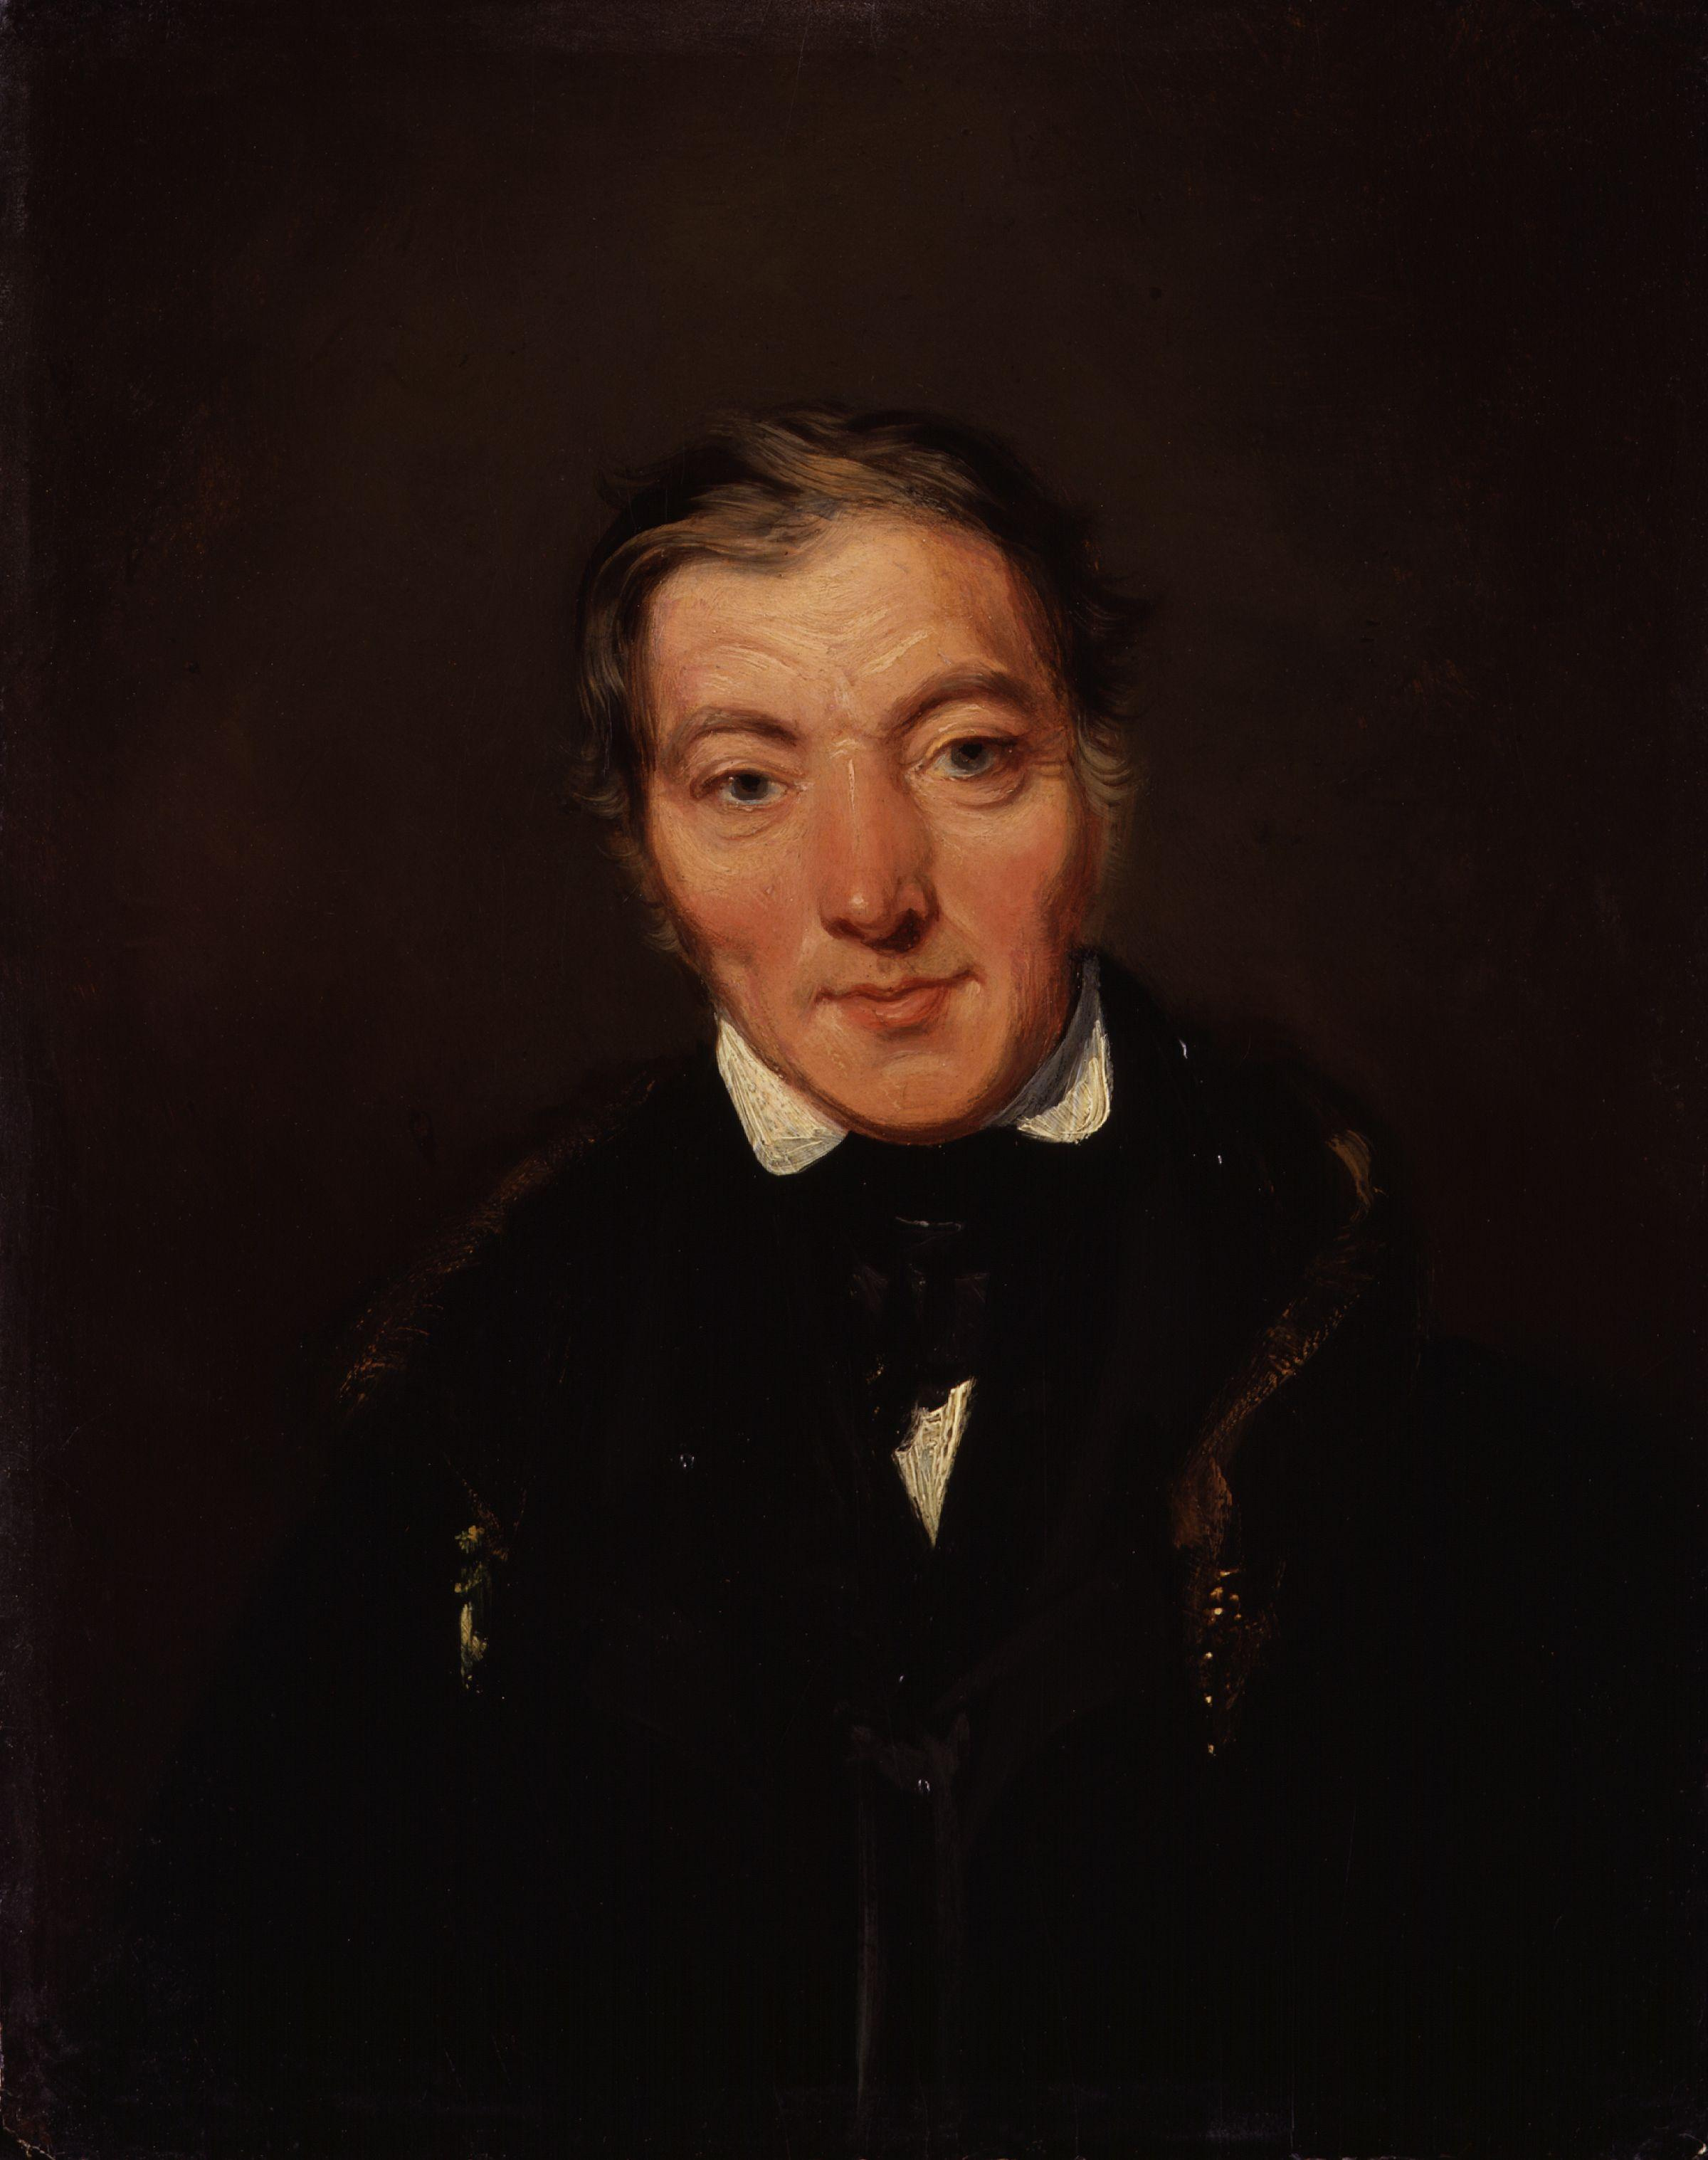 Portrait by [[William Henry Brooke]], 1834